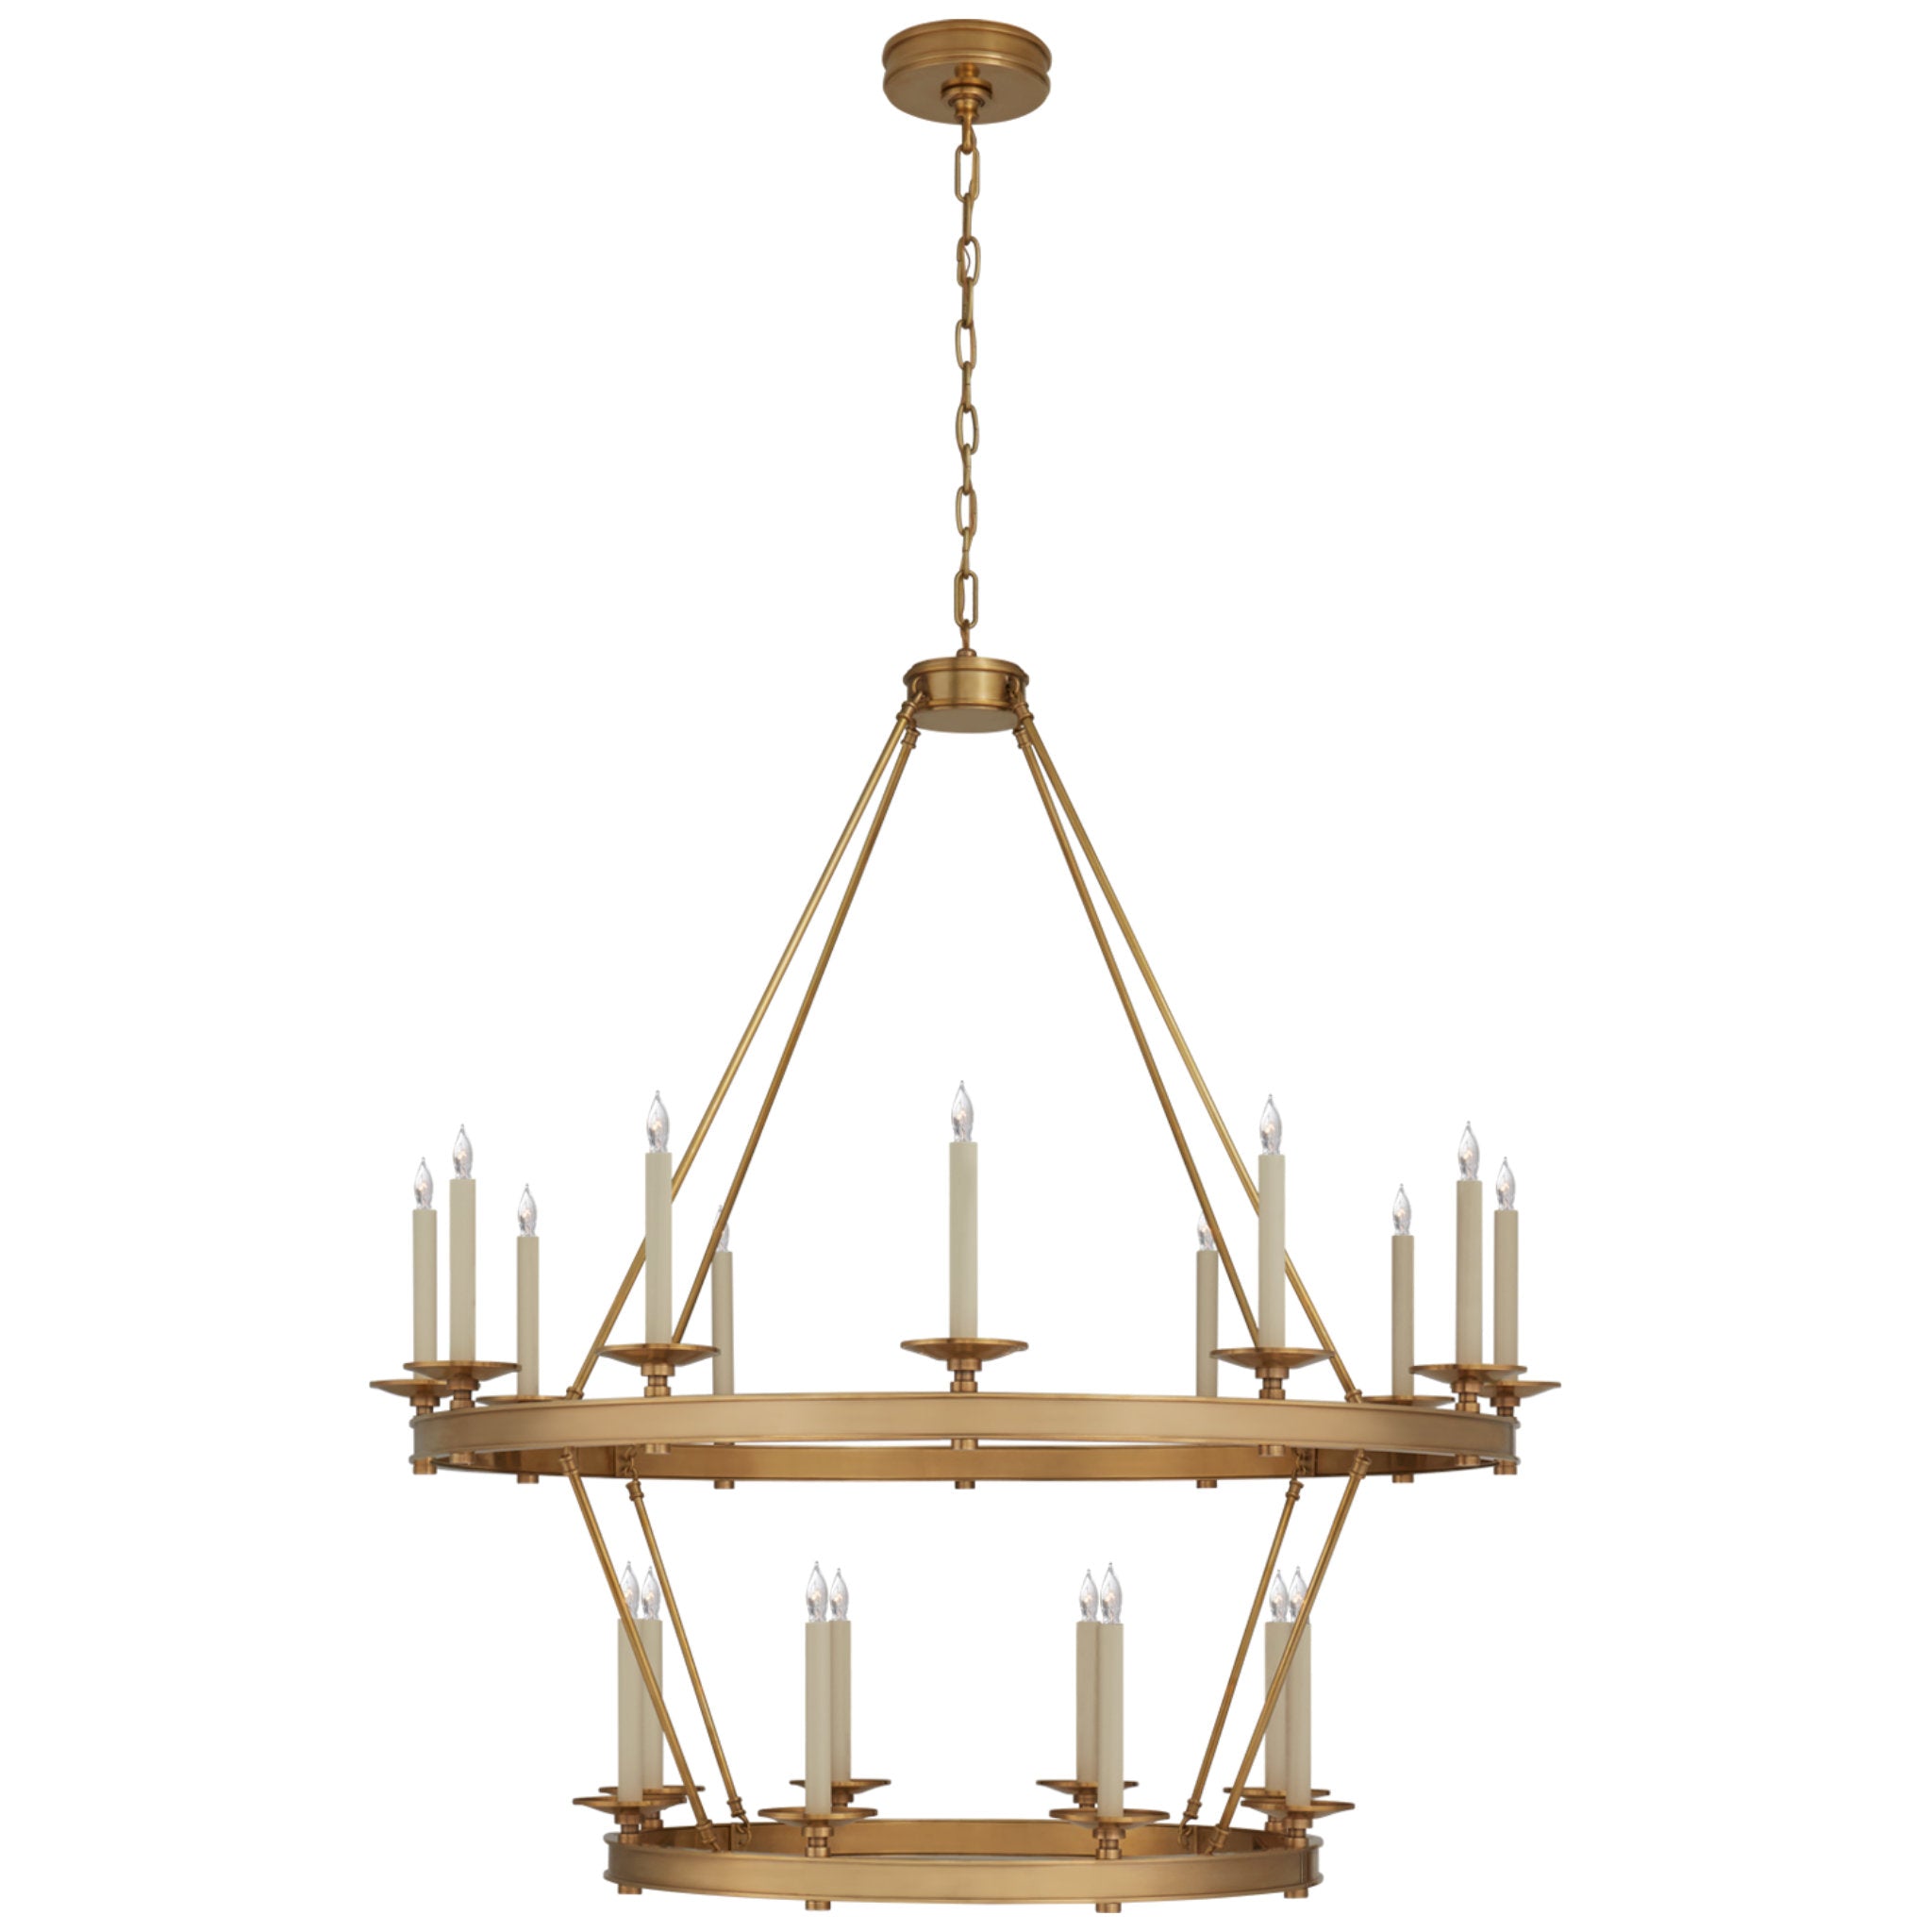 Chapman & Myers Launceton Large Two Tiered Chandelier in Antique-Burnished Brass